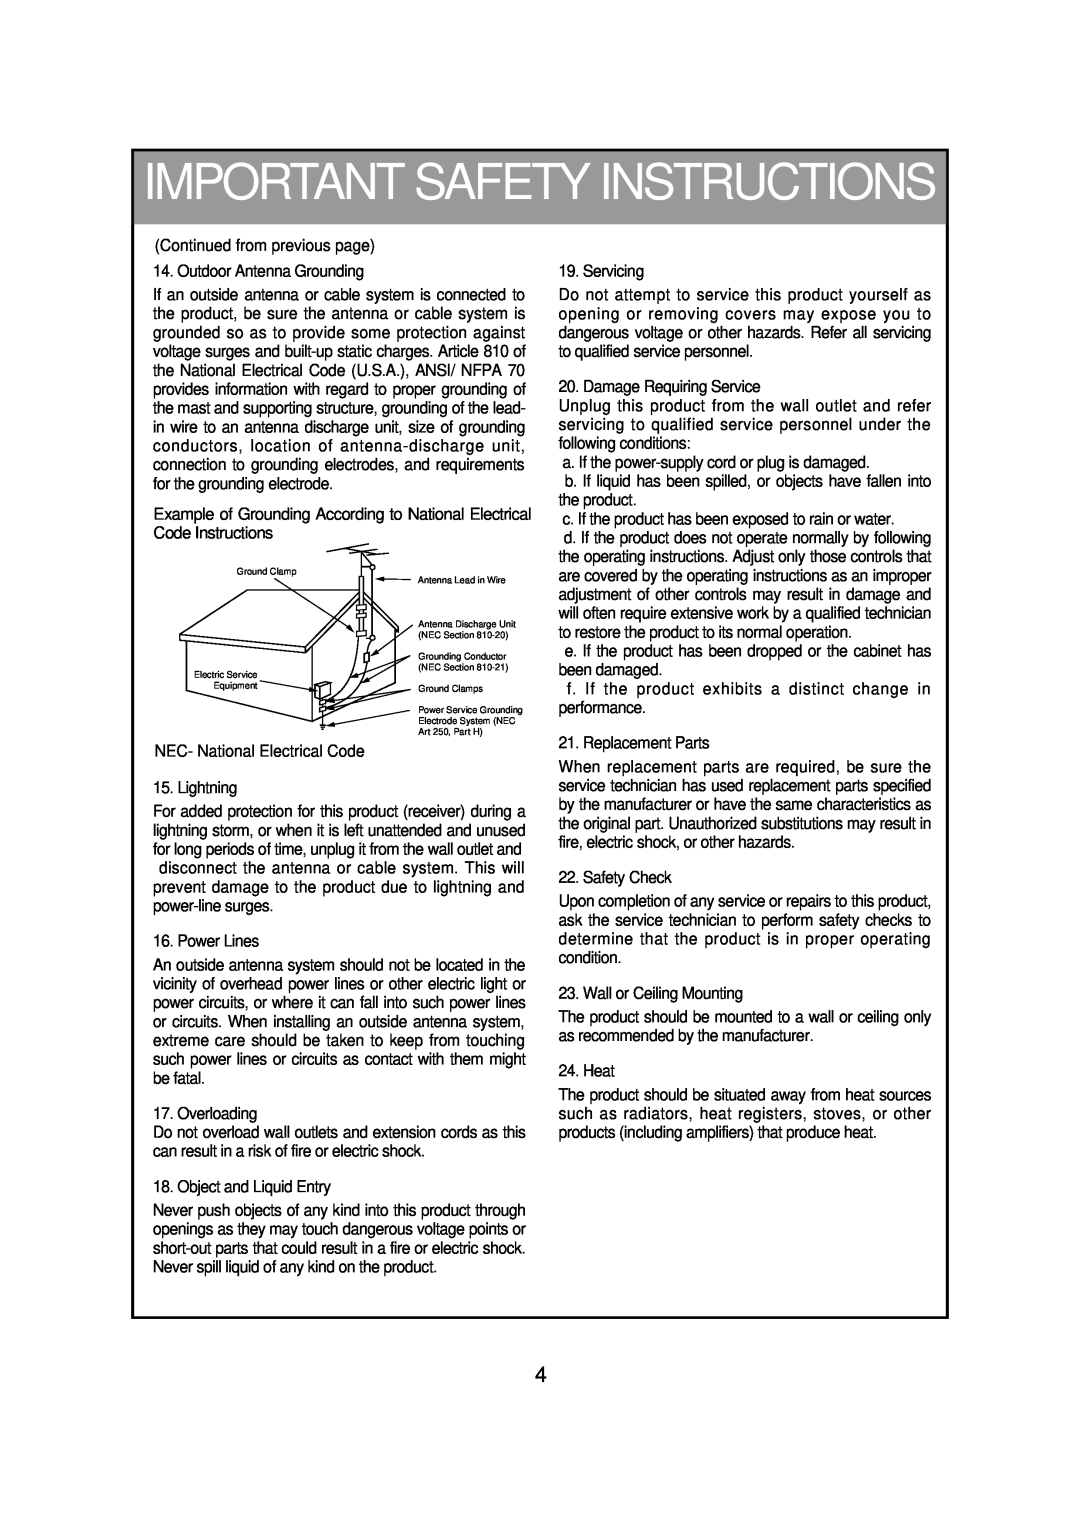 Zenith R40W46 warranty Important Safety Instructions, Continued from previous page 14. Outdoor Antenna Grounding 